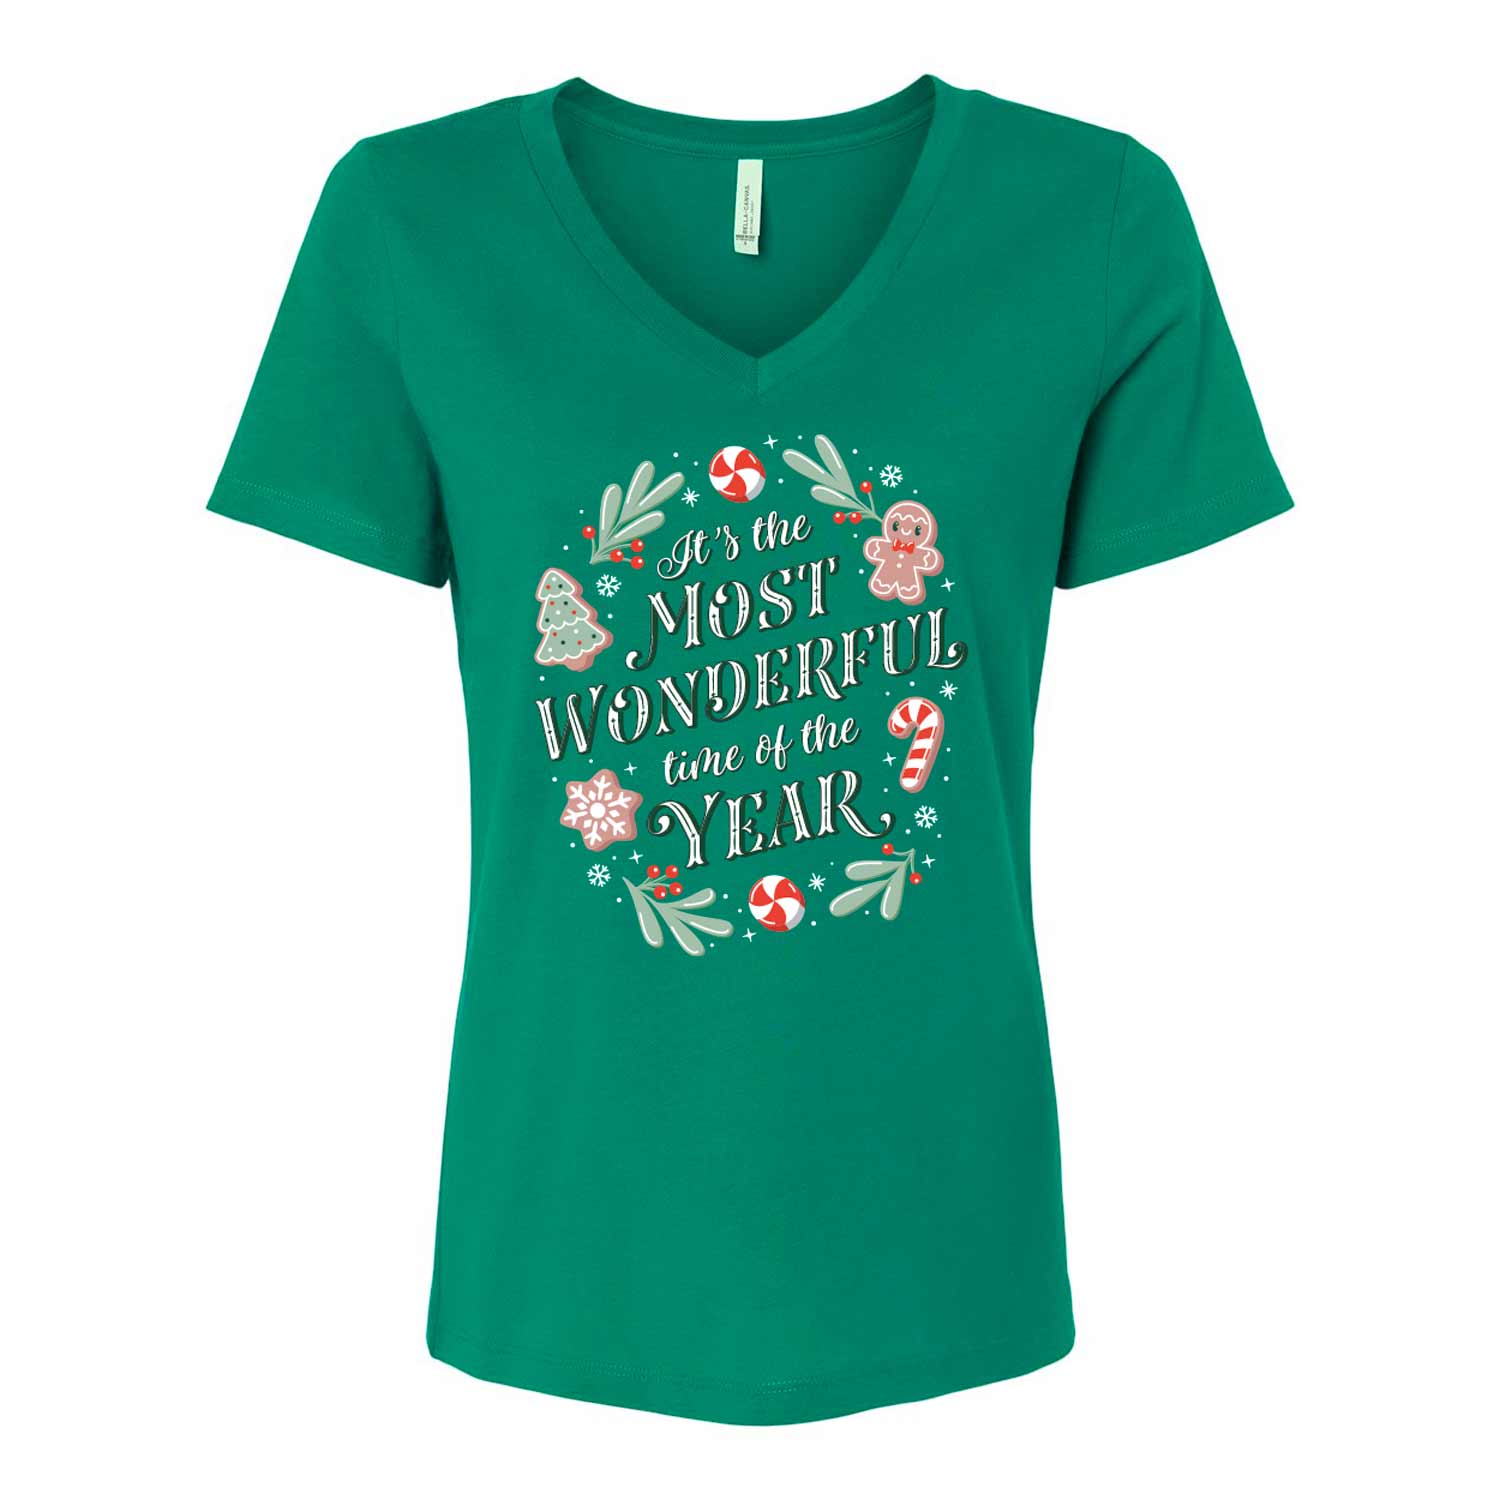 It's the Most Wonderful Time of the Year Ladies V-Neck T-Shirt